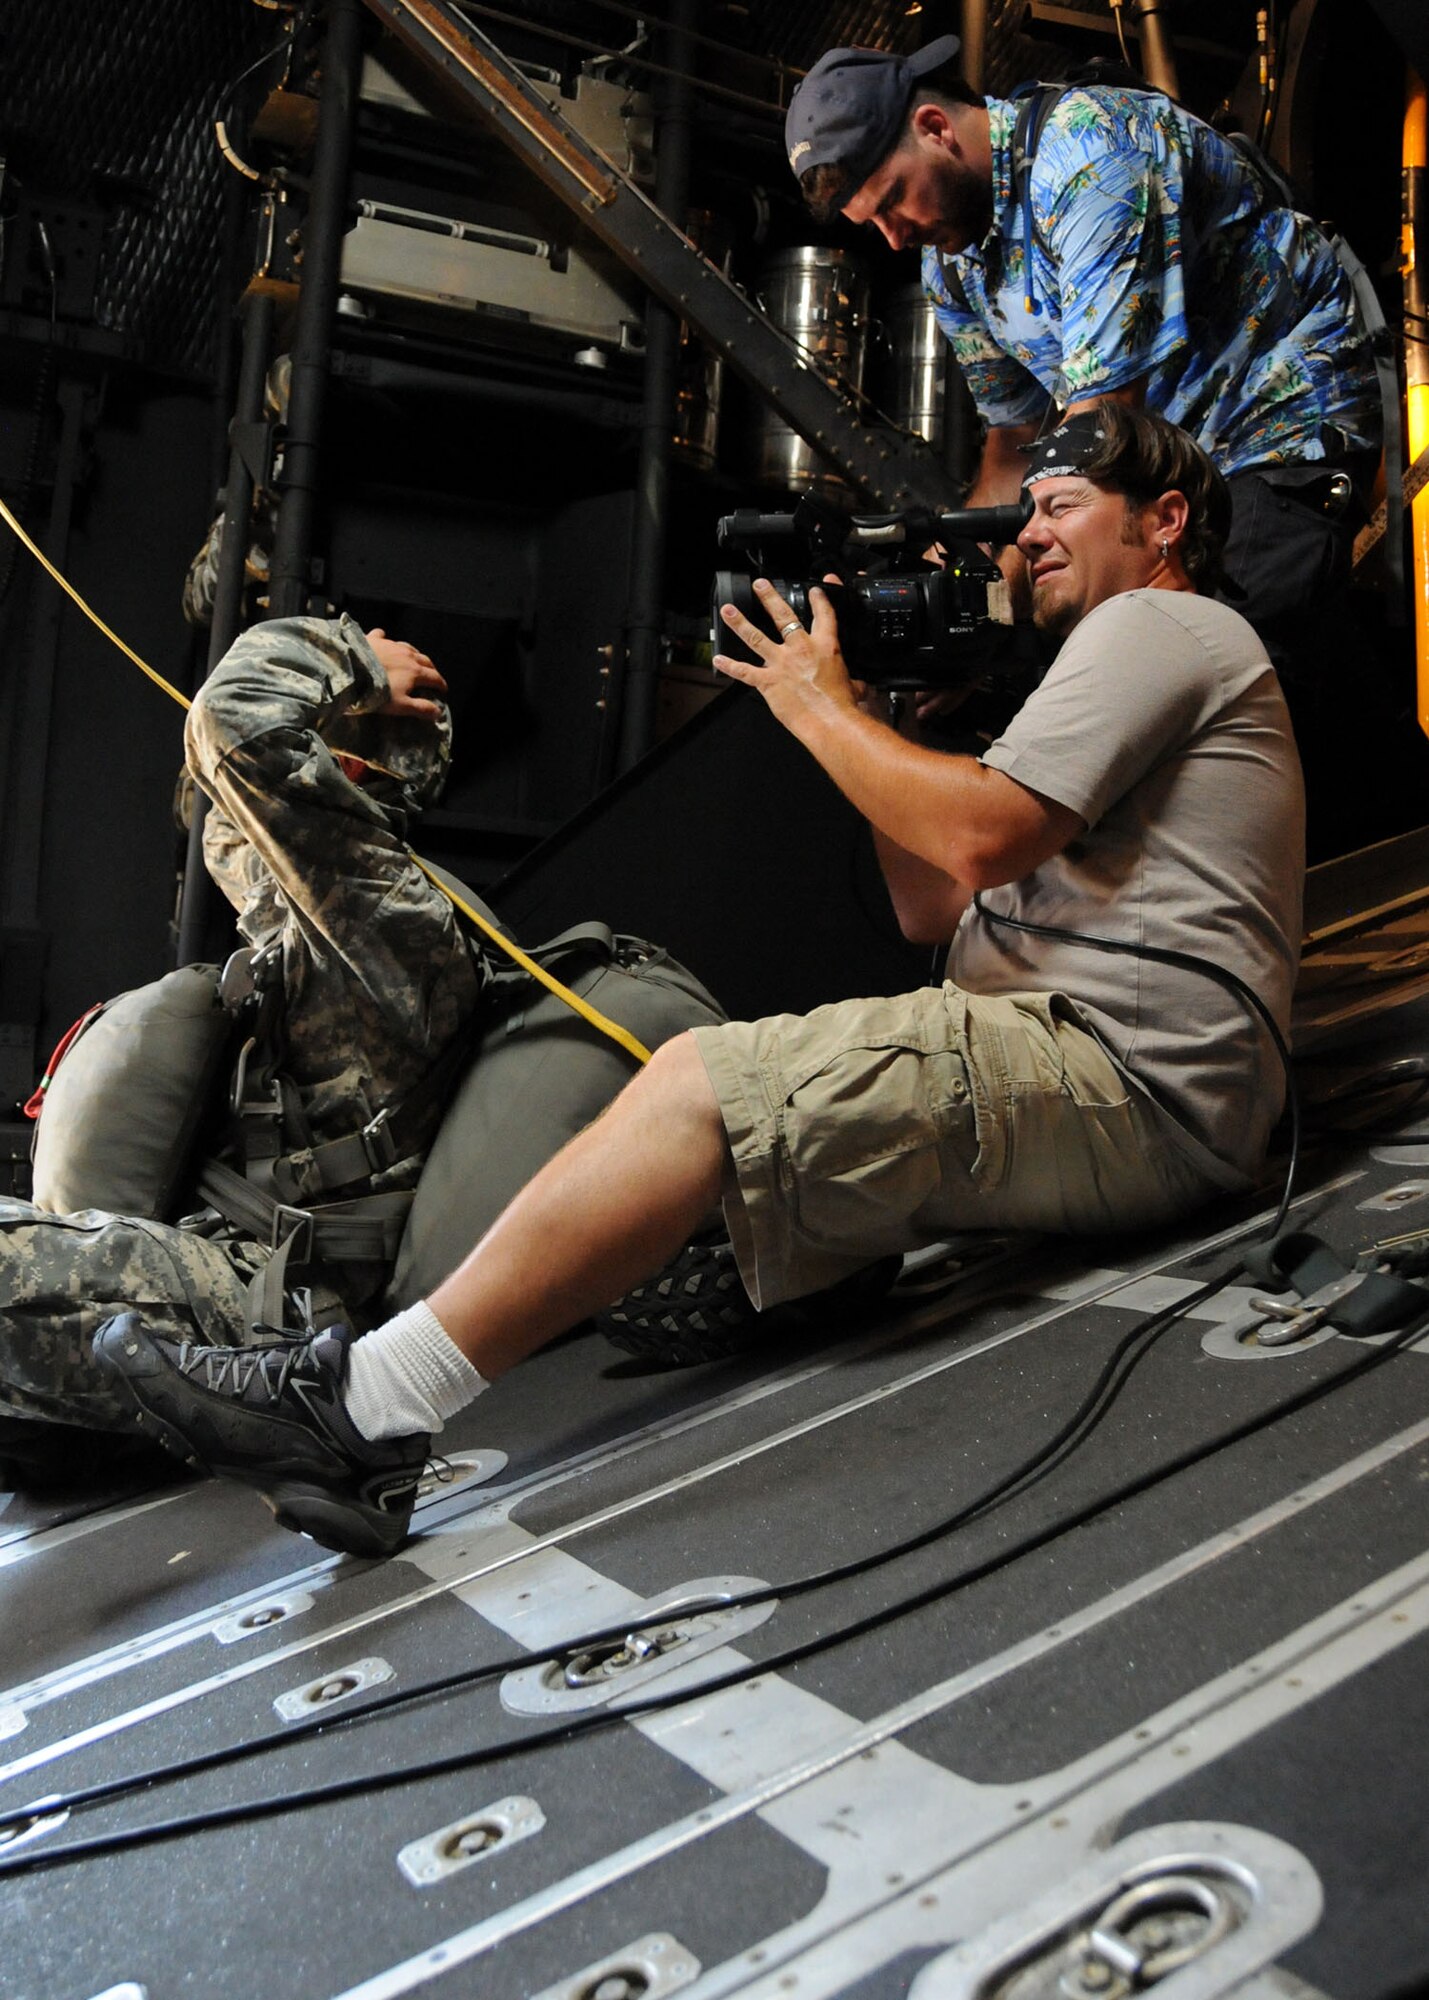 Michael Jechort and Luke Rocheleau, videographers, record a simulated jump scene on the flight line at Duke Field, Fla., June 14. The production company, WILL Interactive, started work on a choose-your-own-adventure film for Department of Defense jumpmaster training at Fort Benning, Ga., with help from members from the U.S. Army Airborne School. However, when the crew needed a C-130 in portions of the video, the 919th Special Operations Wing offered to support the project at Duke Field June 13-15. (U.S. Air Force photo/Tech. Sgt. Cheryl Foster)